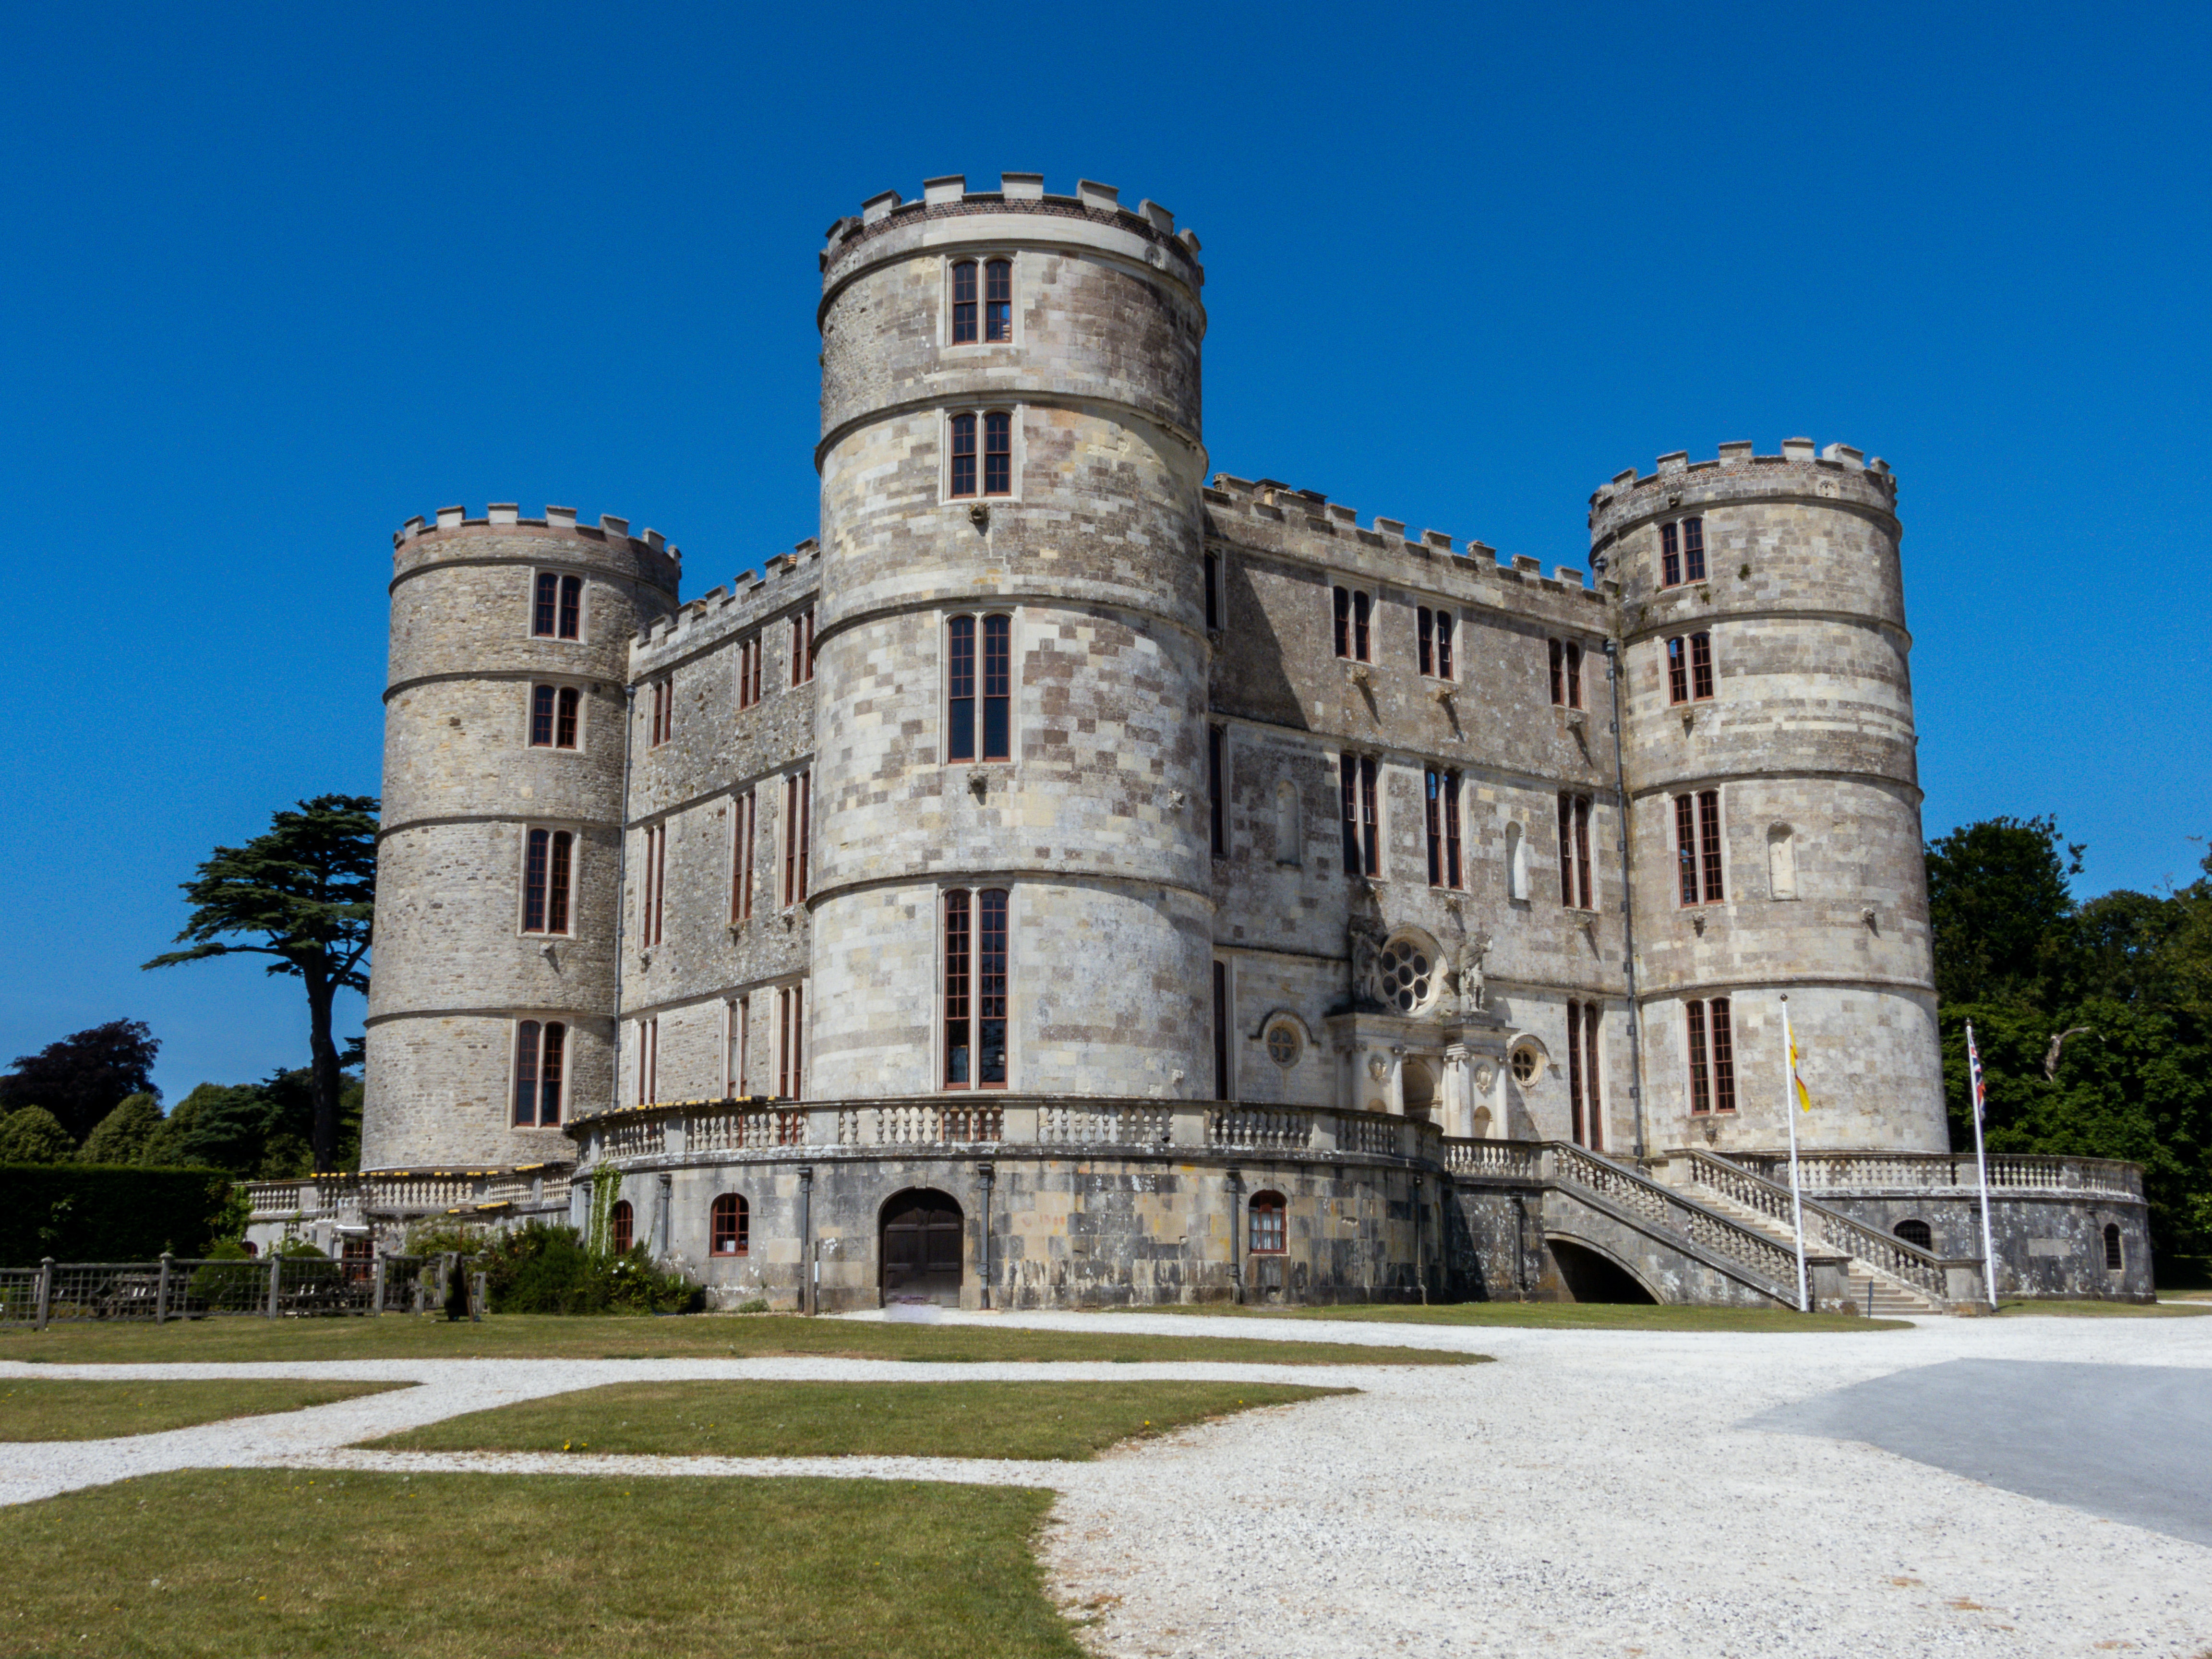 Lulworth Castle, the home of Camp Bestival